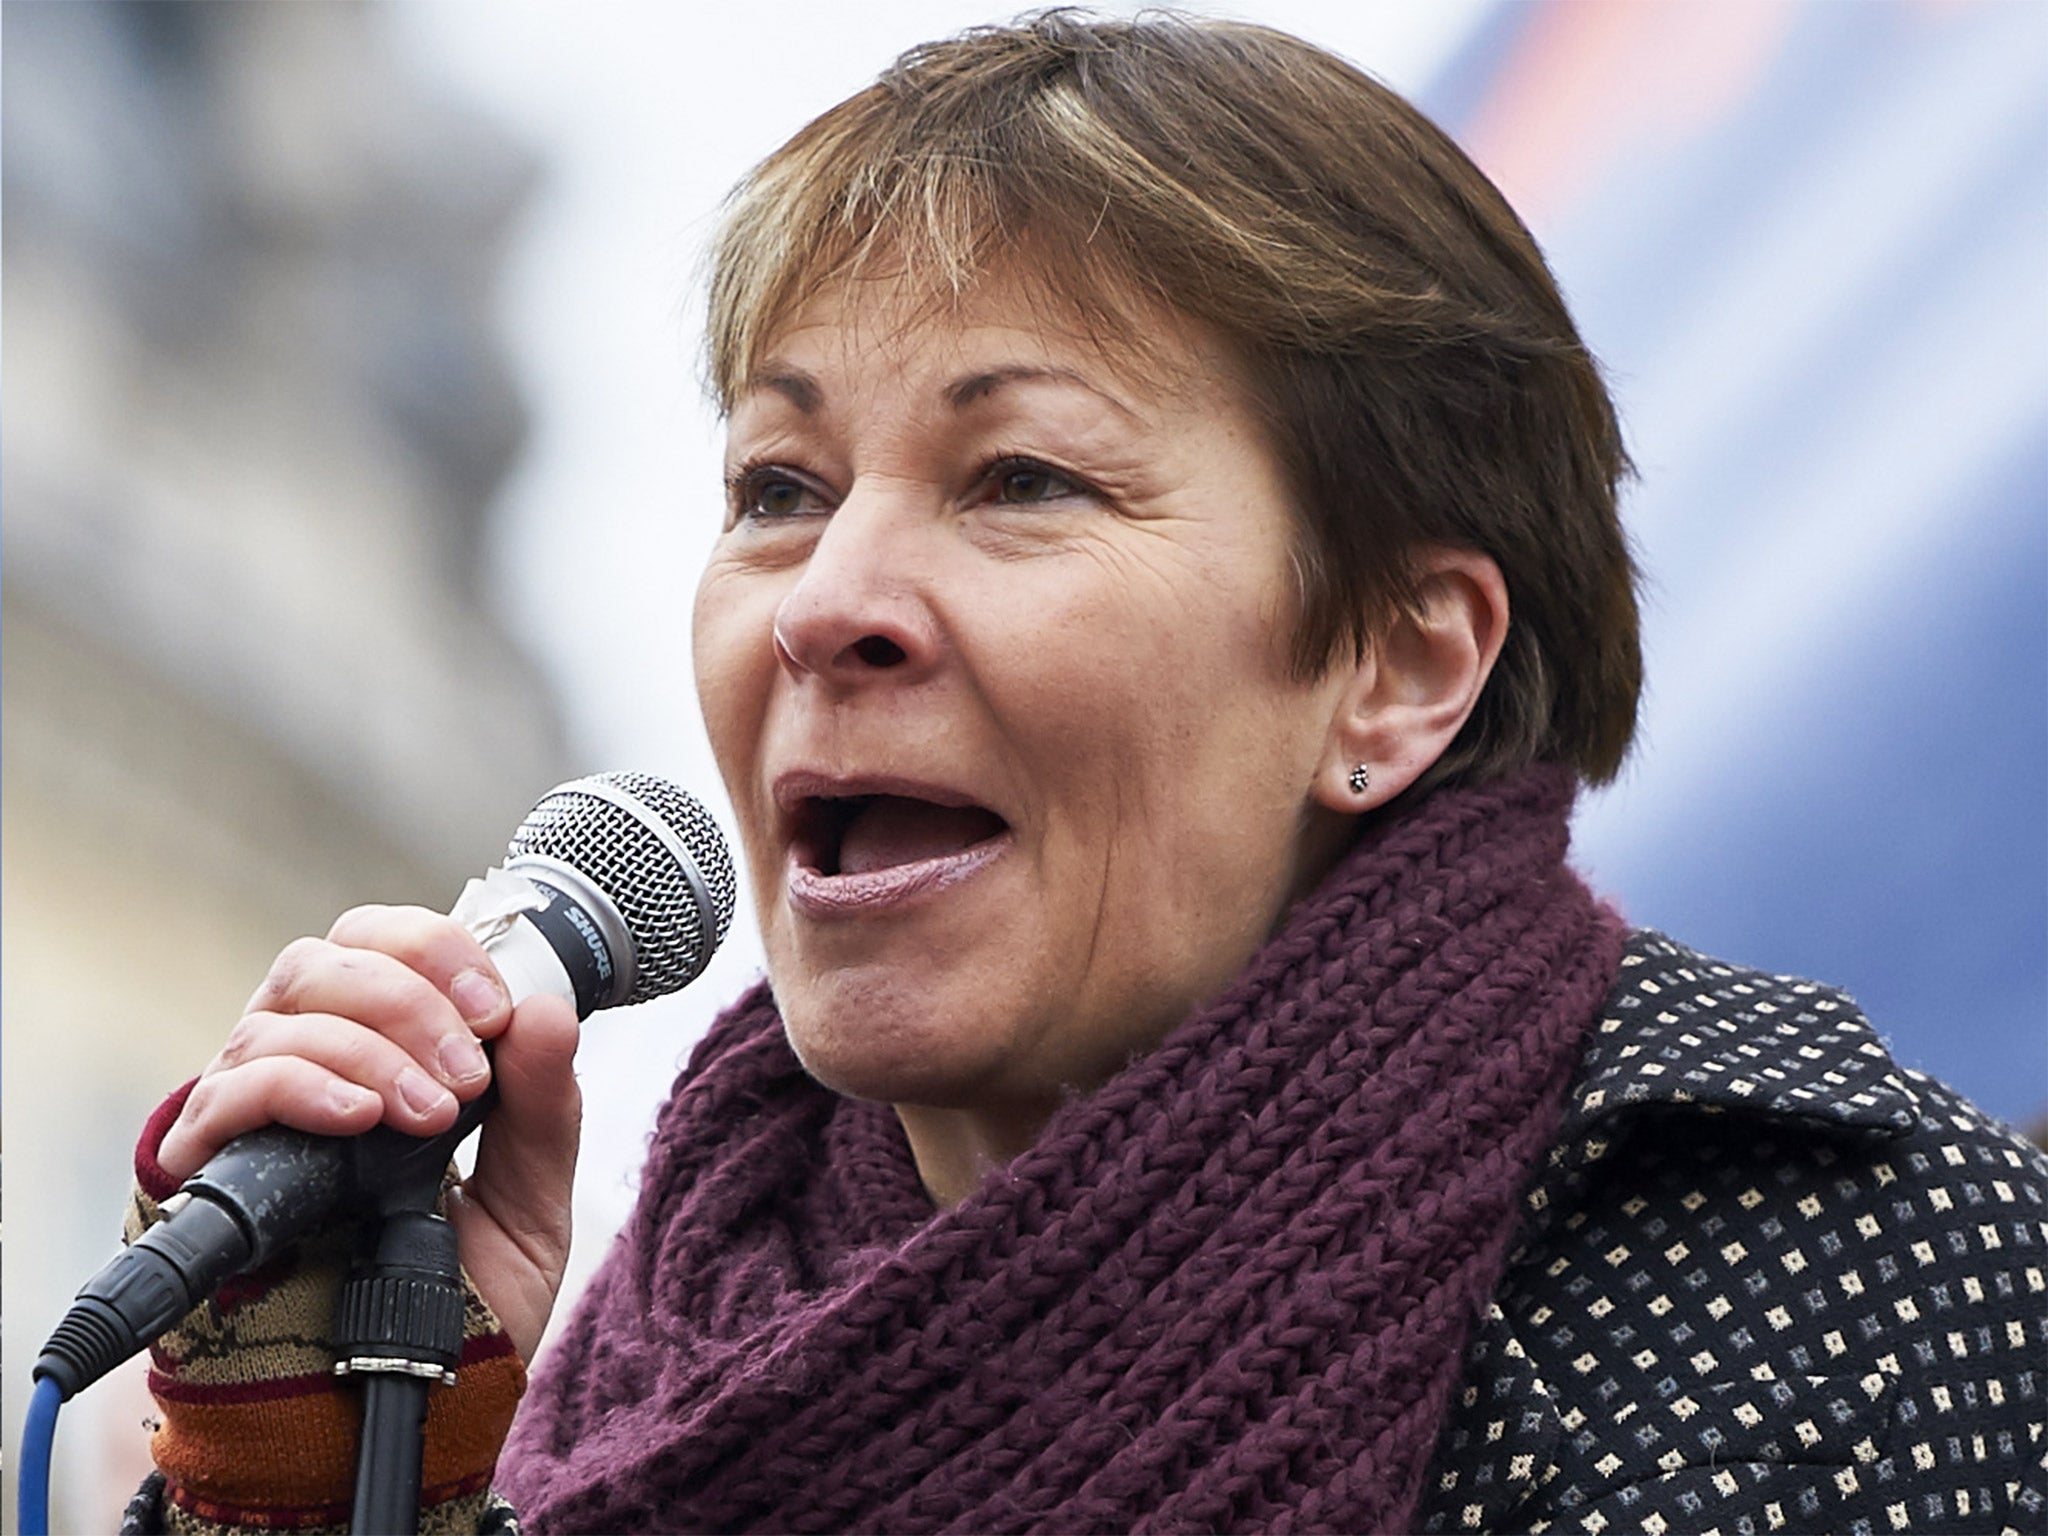 Green MP Caroline Lucas will today warn about giving in to ‘the poisonous rhetoric of Ukip’